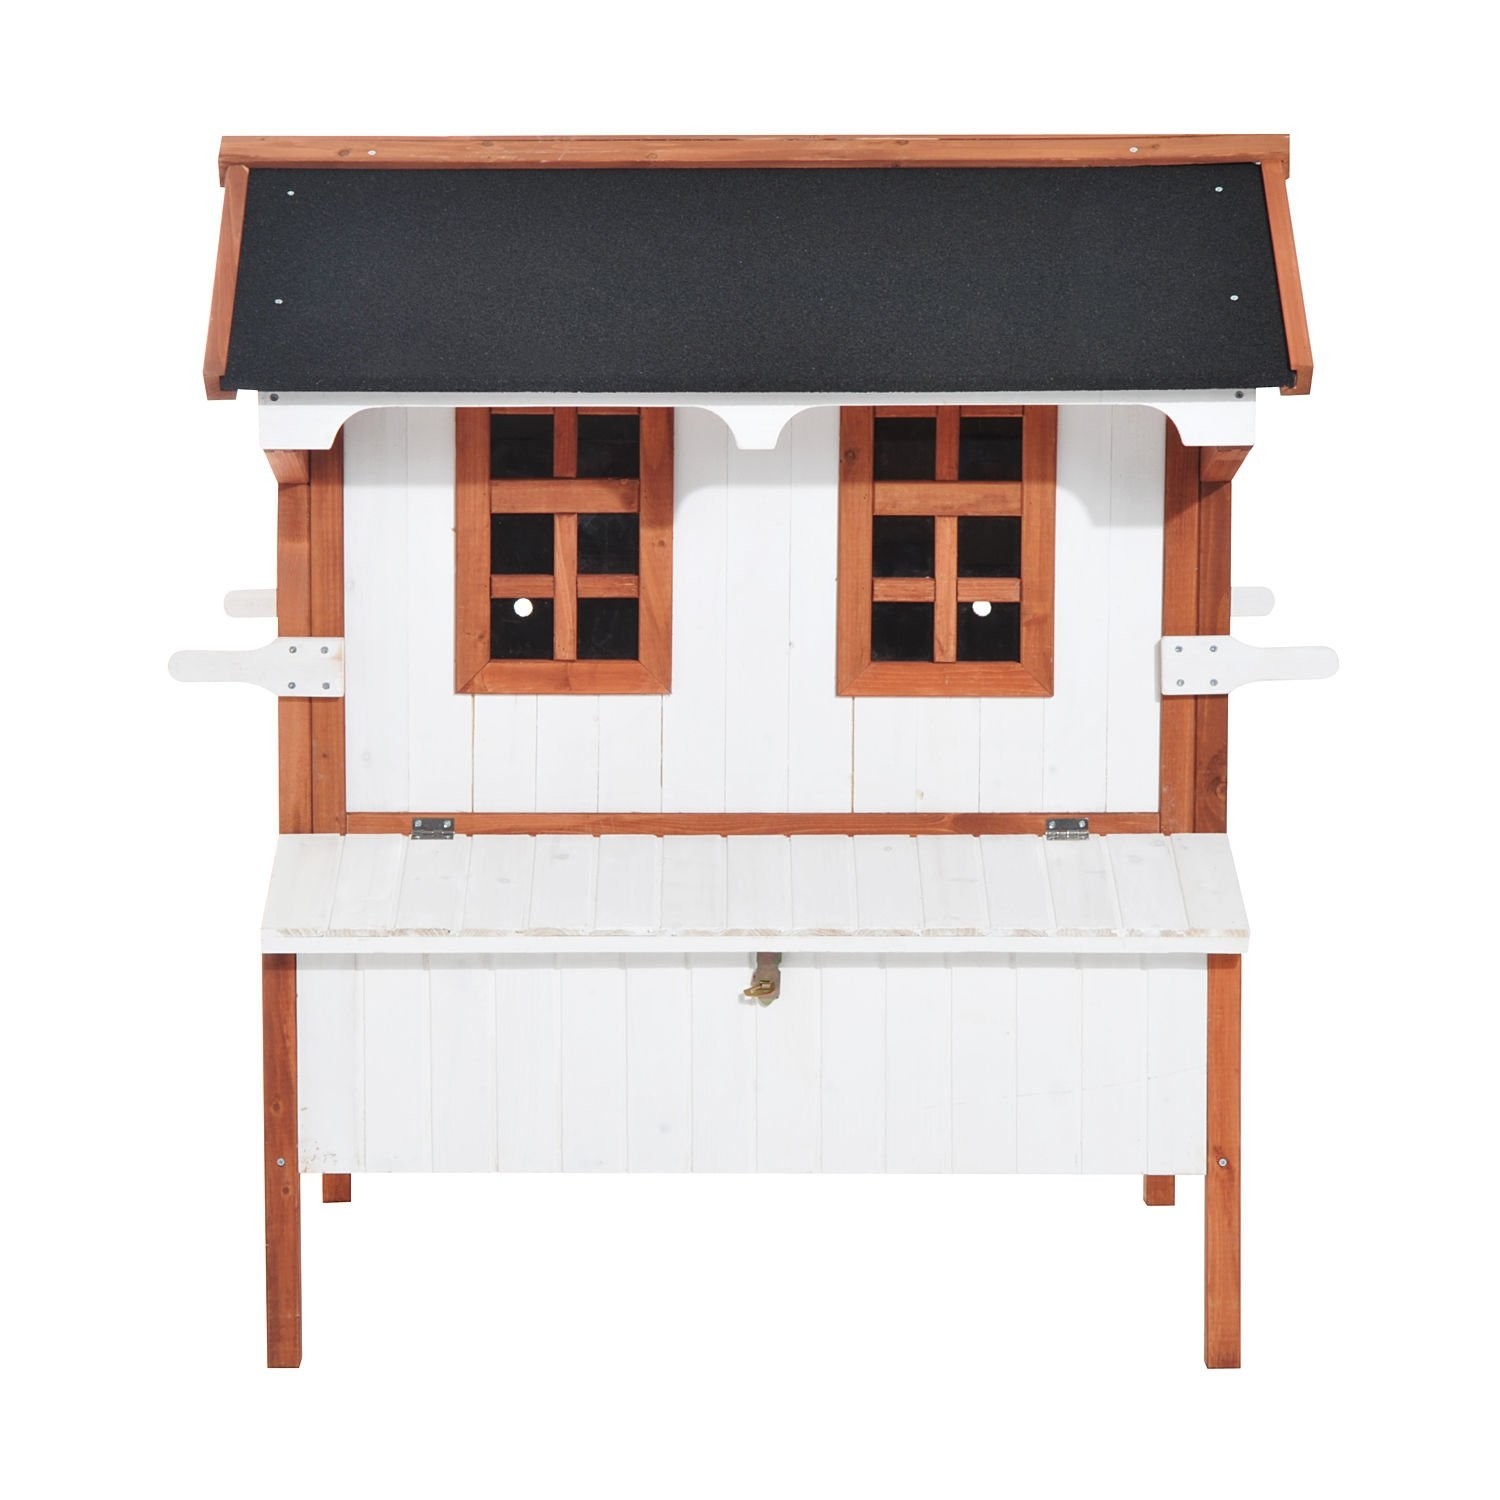 Gennessee Wooden Cottage Raised Portable Backyard Chicken Coop with Nesting Box